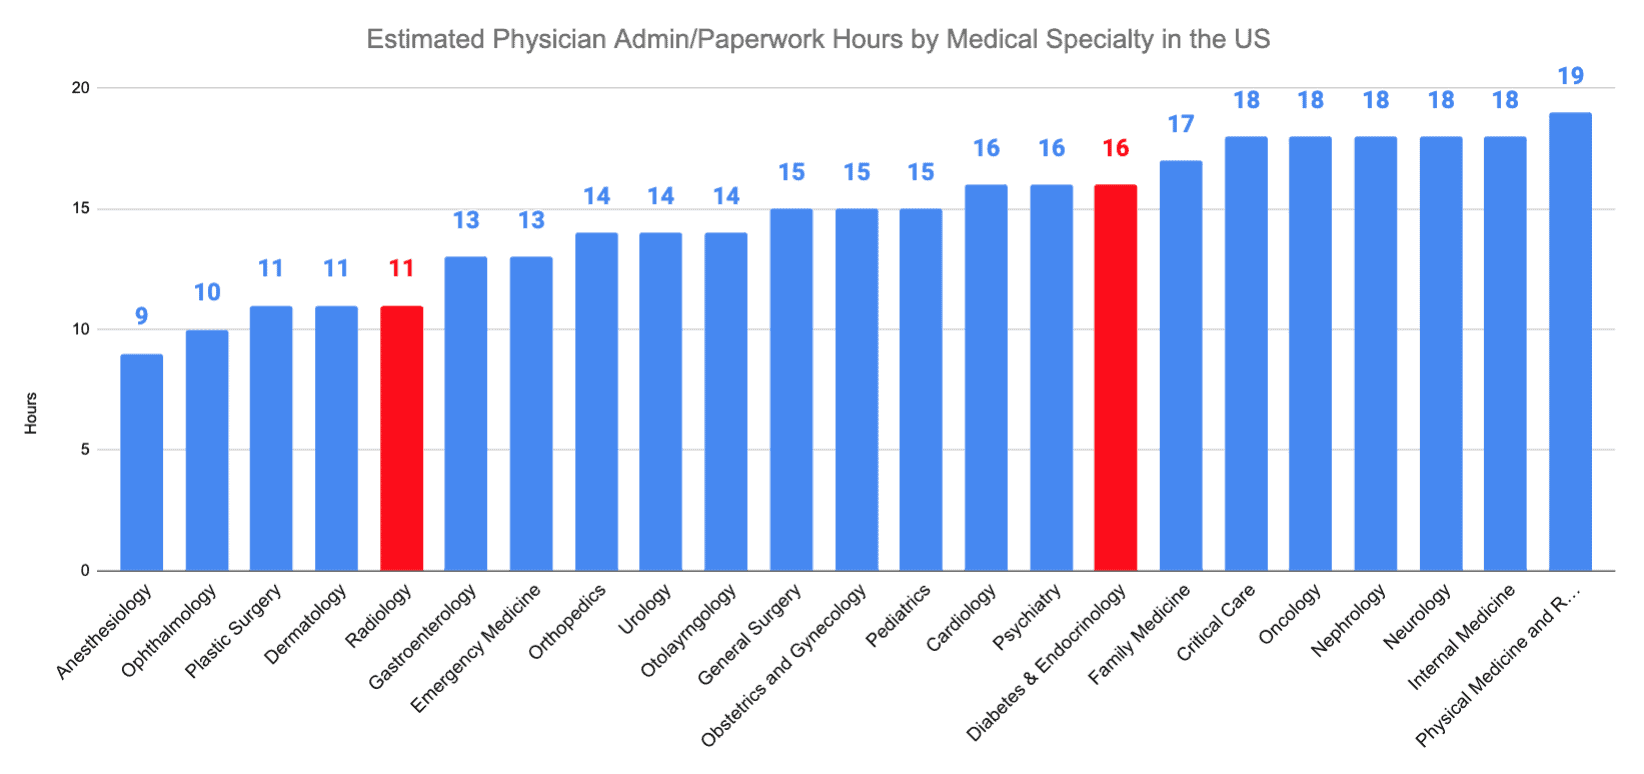 Radiology vs. Diabetes and Endocrinology Estimated Physician Admin/Paperwork Hours by Medical Specialty in the US